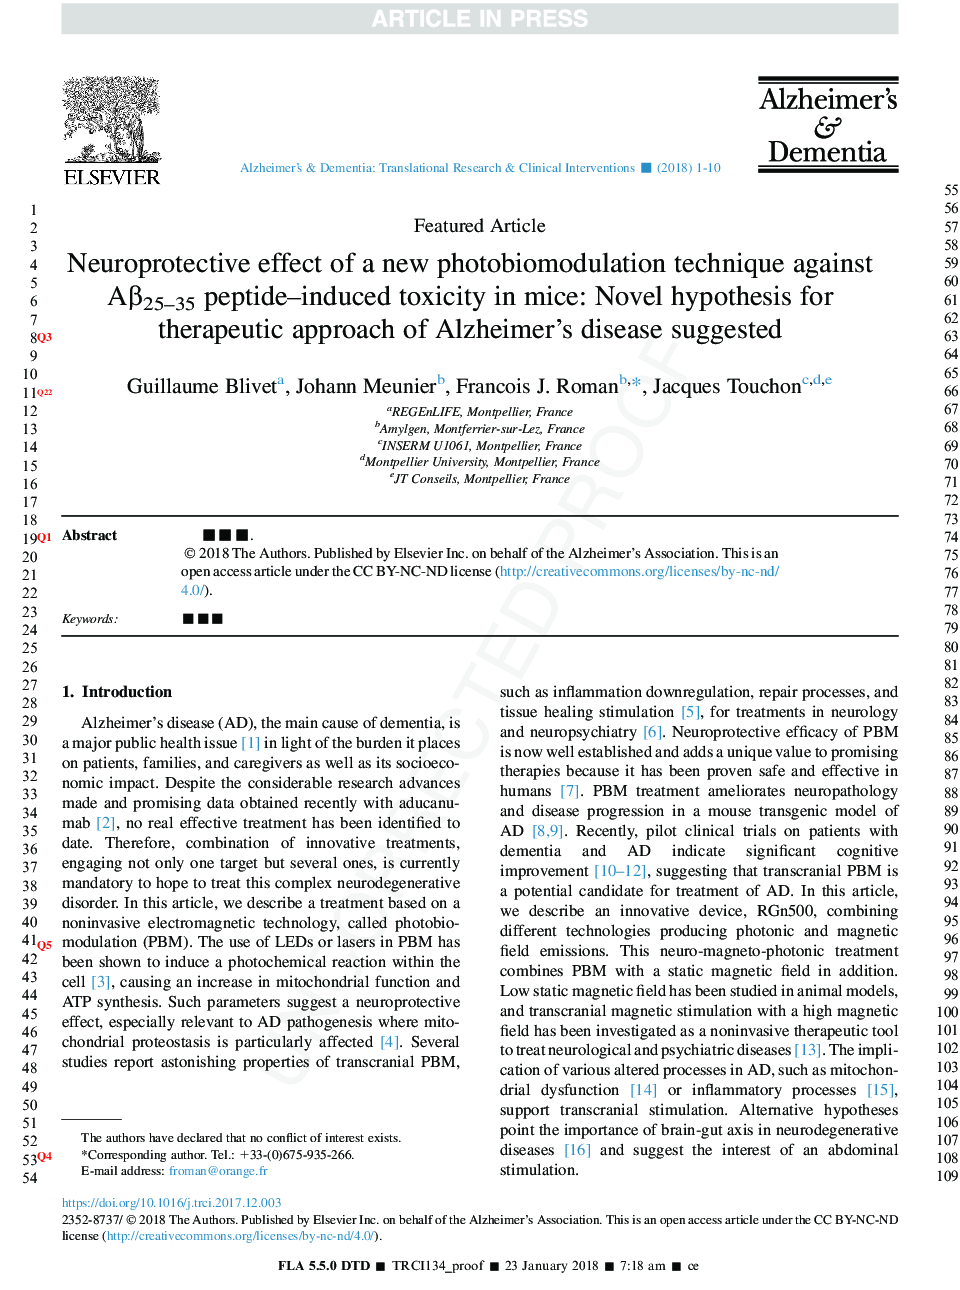 Neuroprotective effect of a new photobiomodulation technique against AÎ²25-35 peptide-induced toxicity in mice: Novel hypothesis for therapeutic approach of Alzheimer's disease suggested